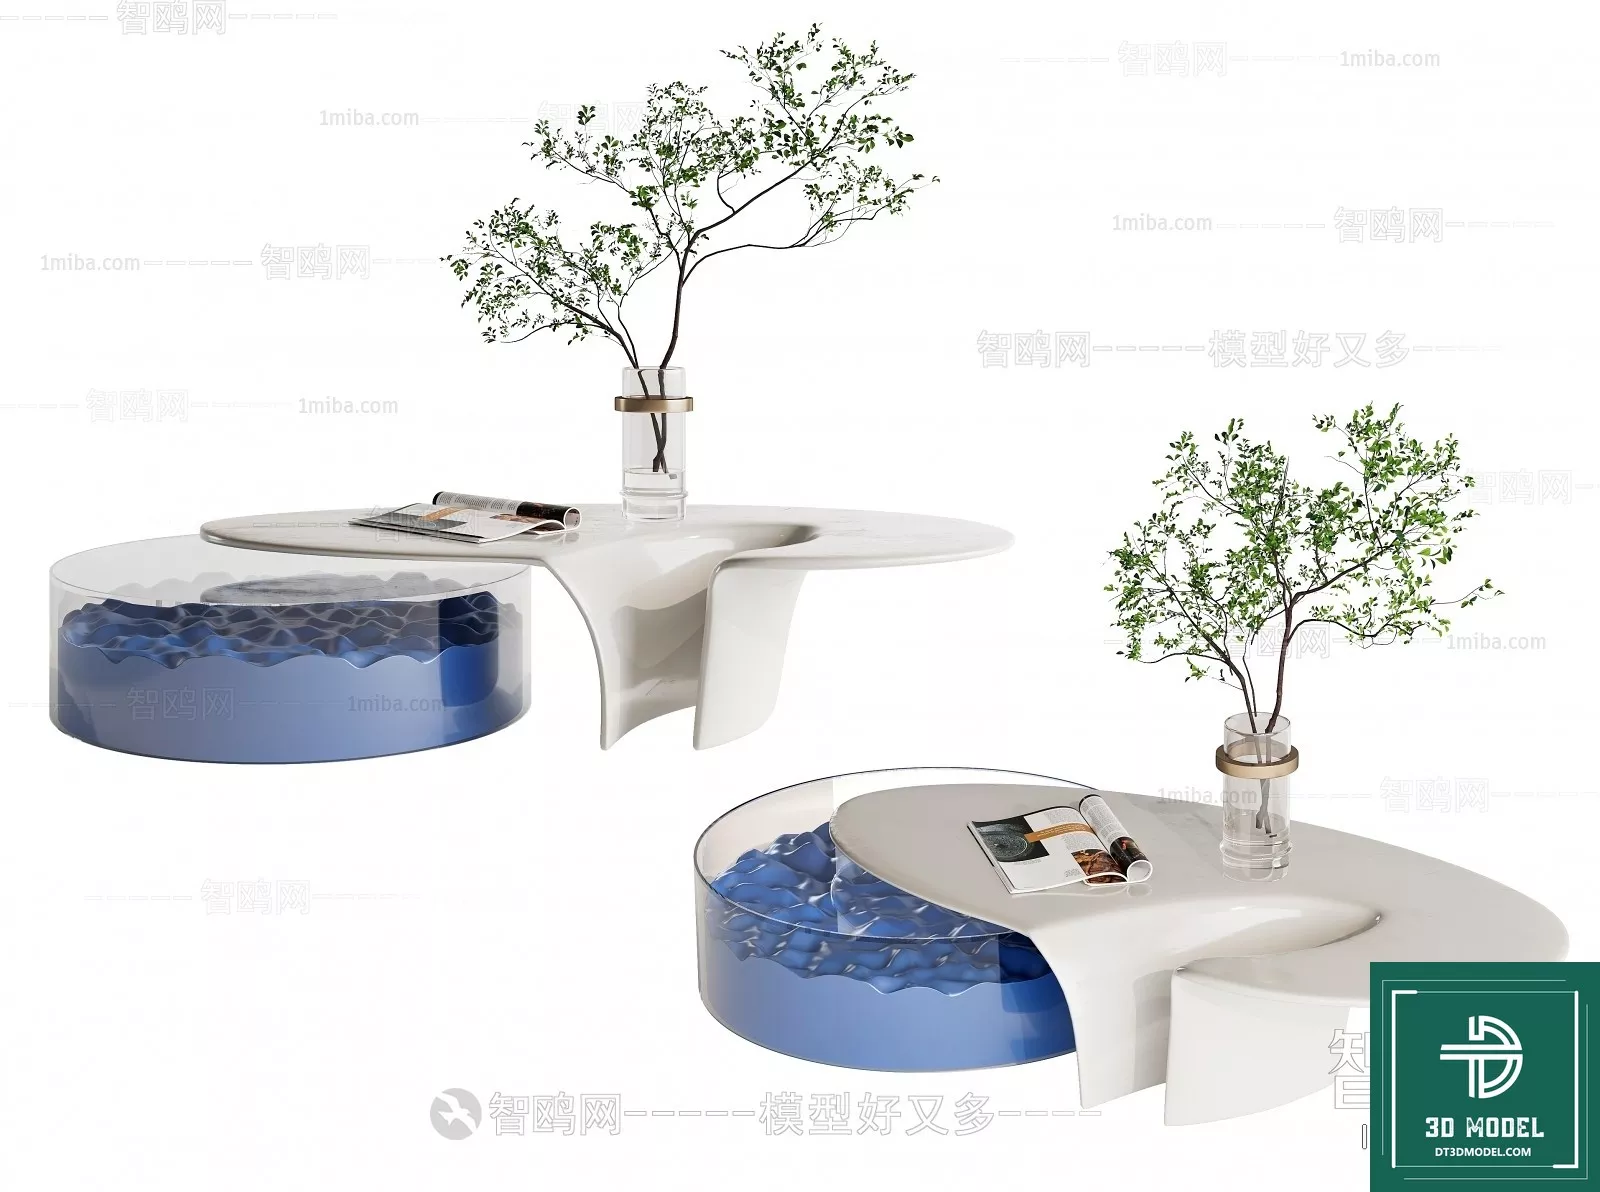 MODERN TEA TABLE - SKETCHUP 3D MODEL - VRAY OR ENSCAPE - ID15000